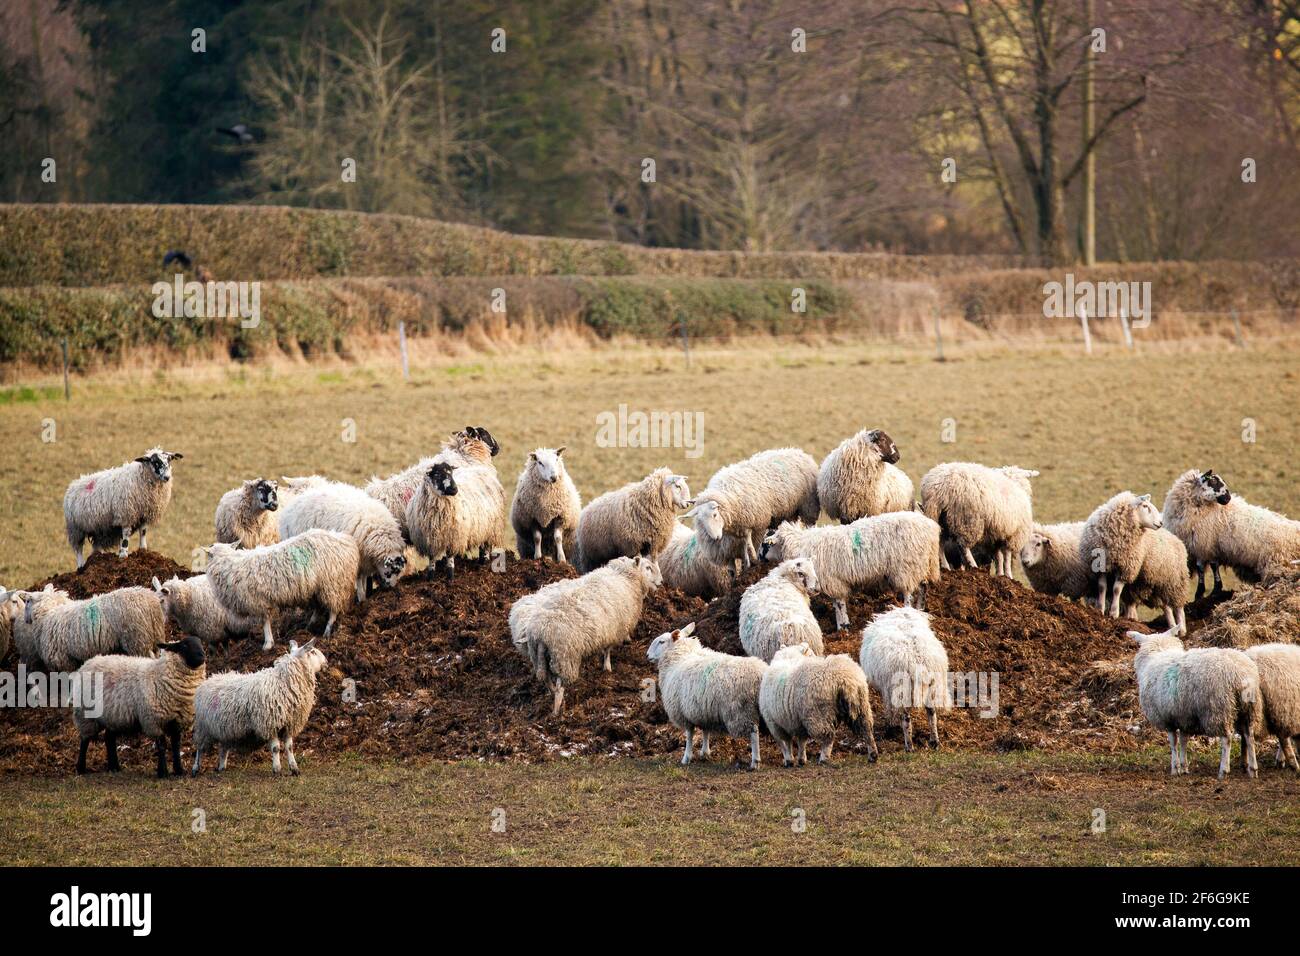 Flock of sheep in the English countryside playing and climbing on a heap of manure during winter Stock Photo